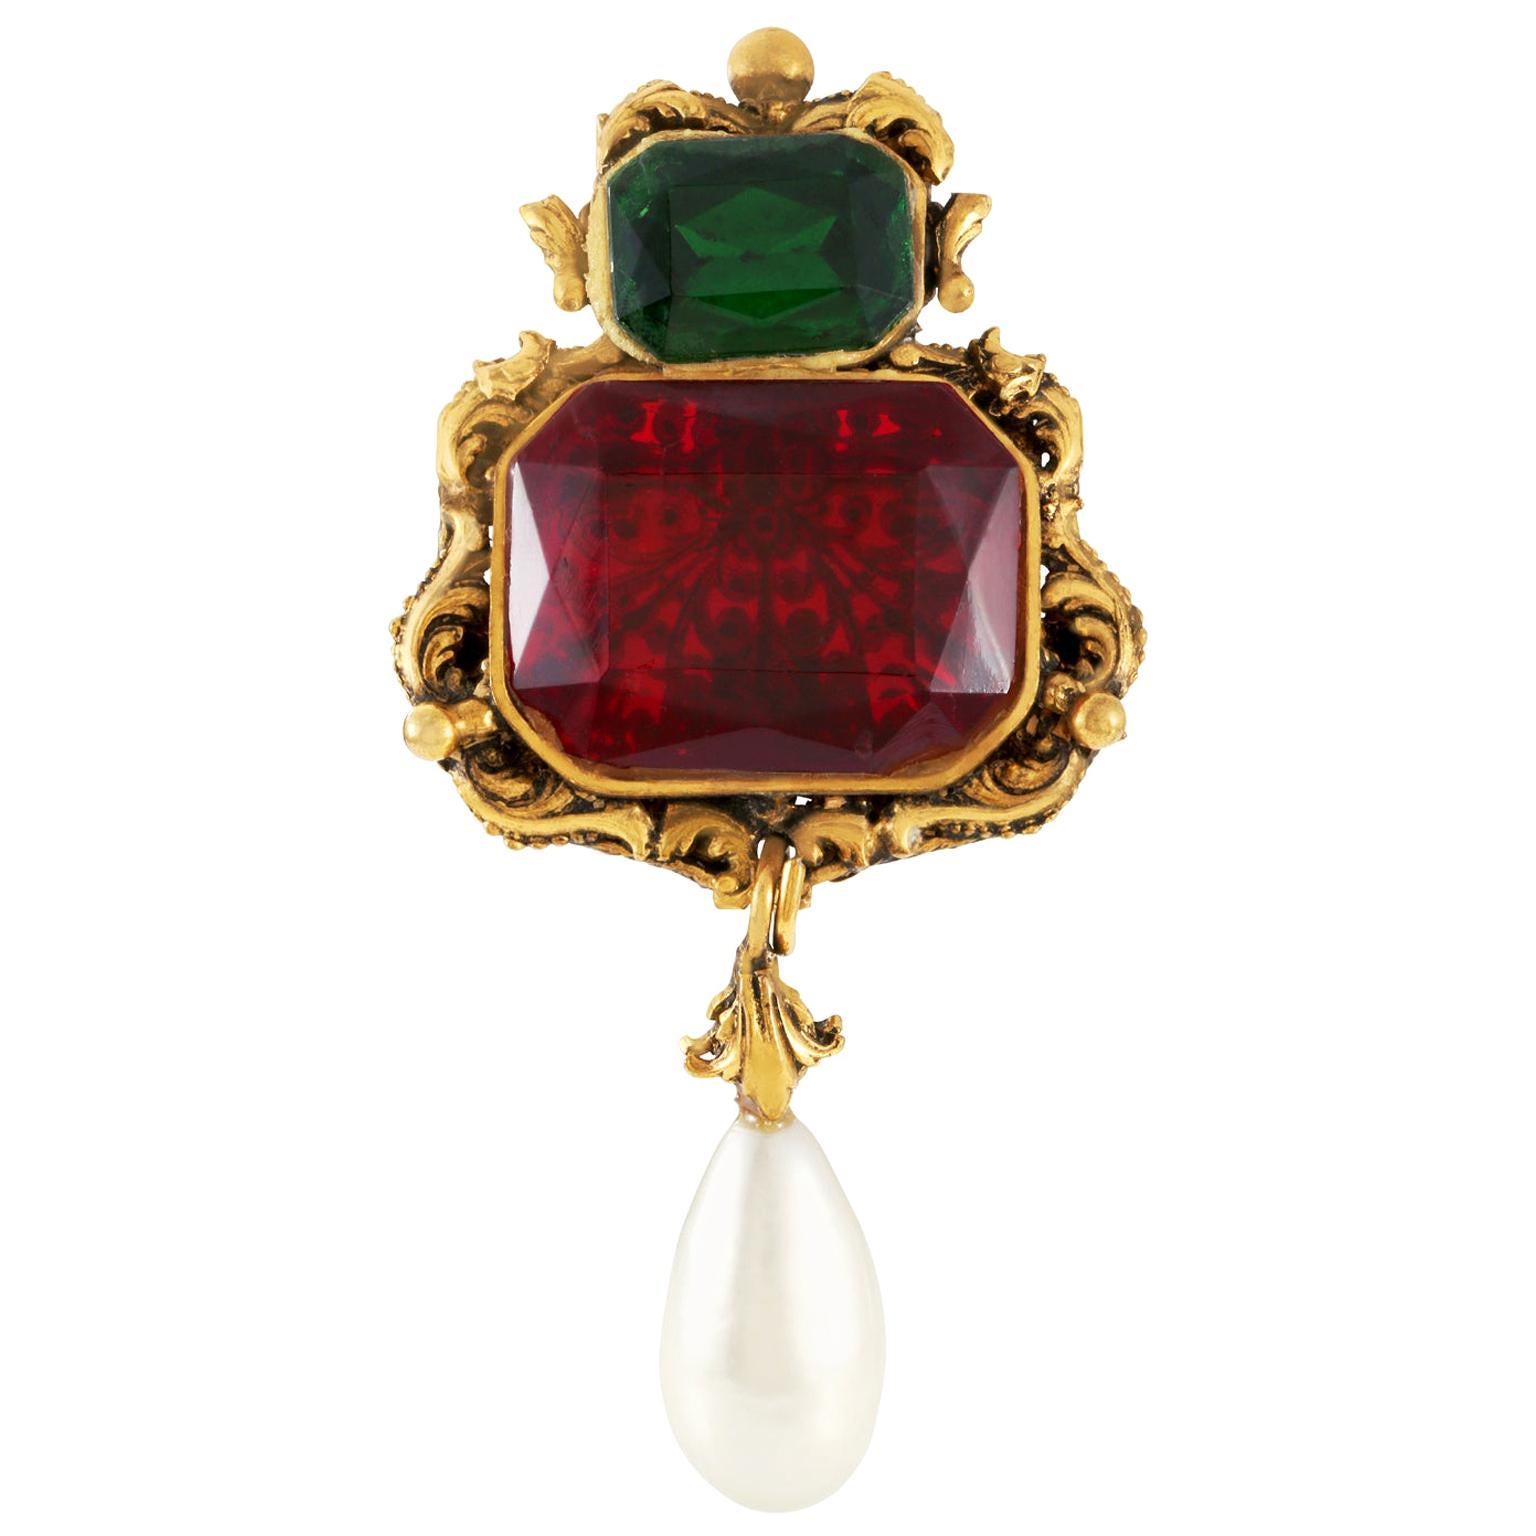 Chanel Red and Green Gripoix Emerald Cut Vintage Brooch